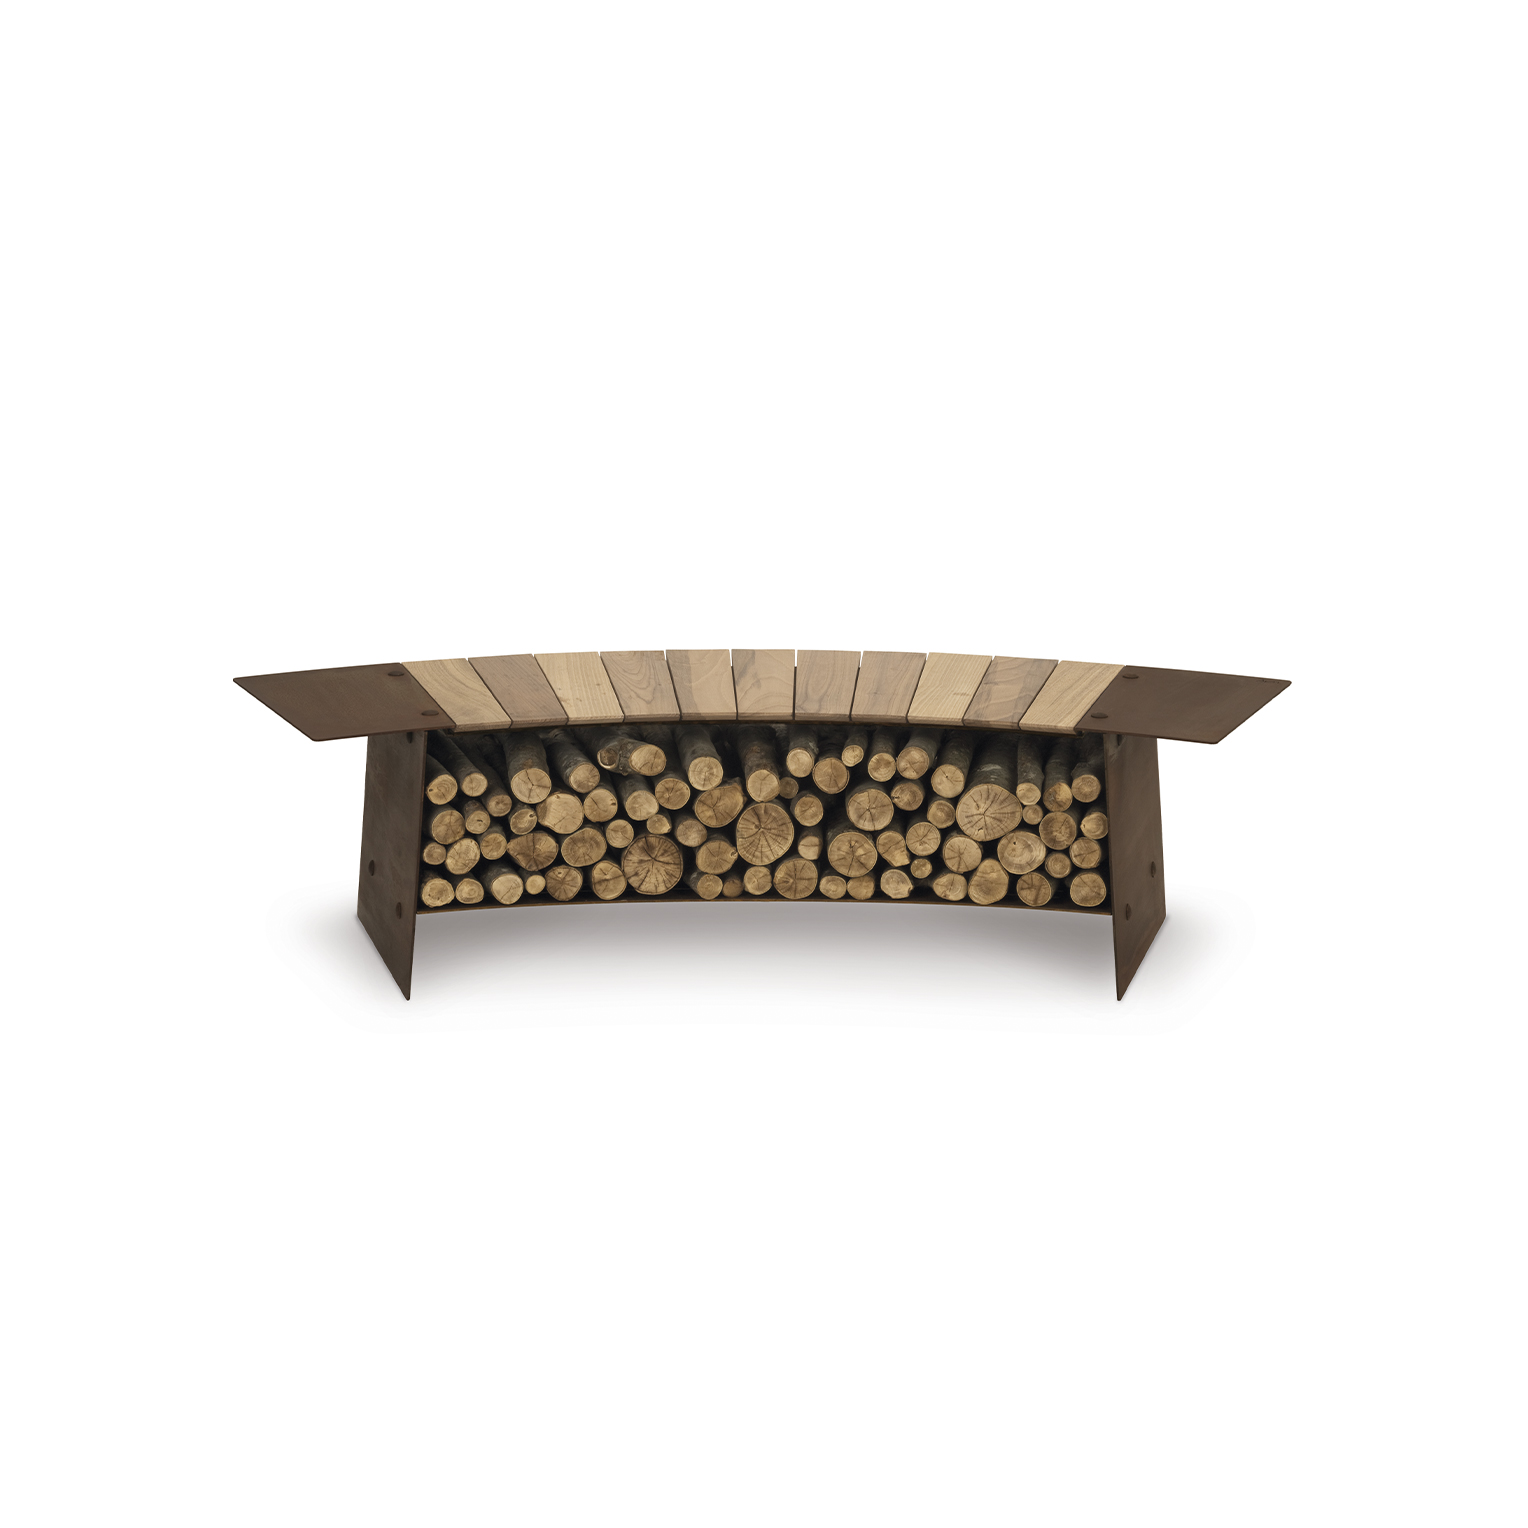 Outdoor Firepit Tobia by AK47